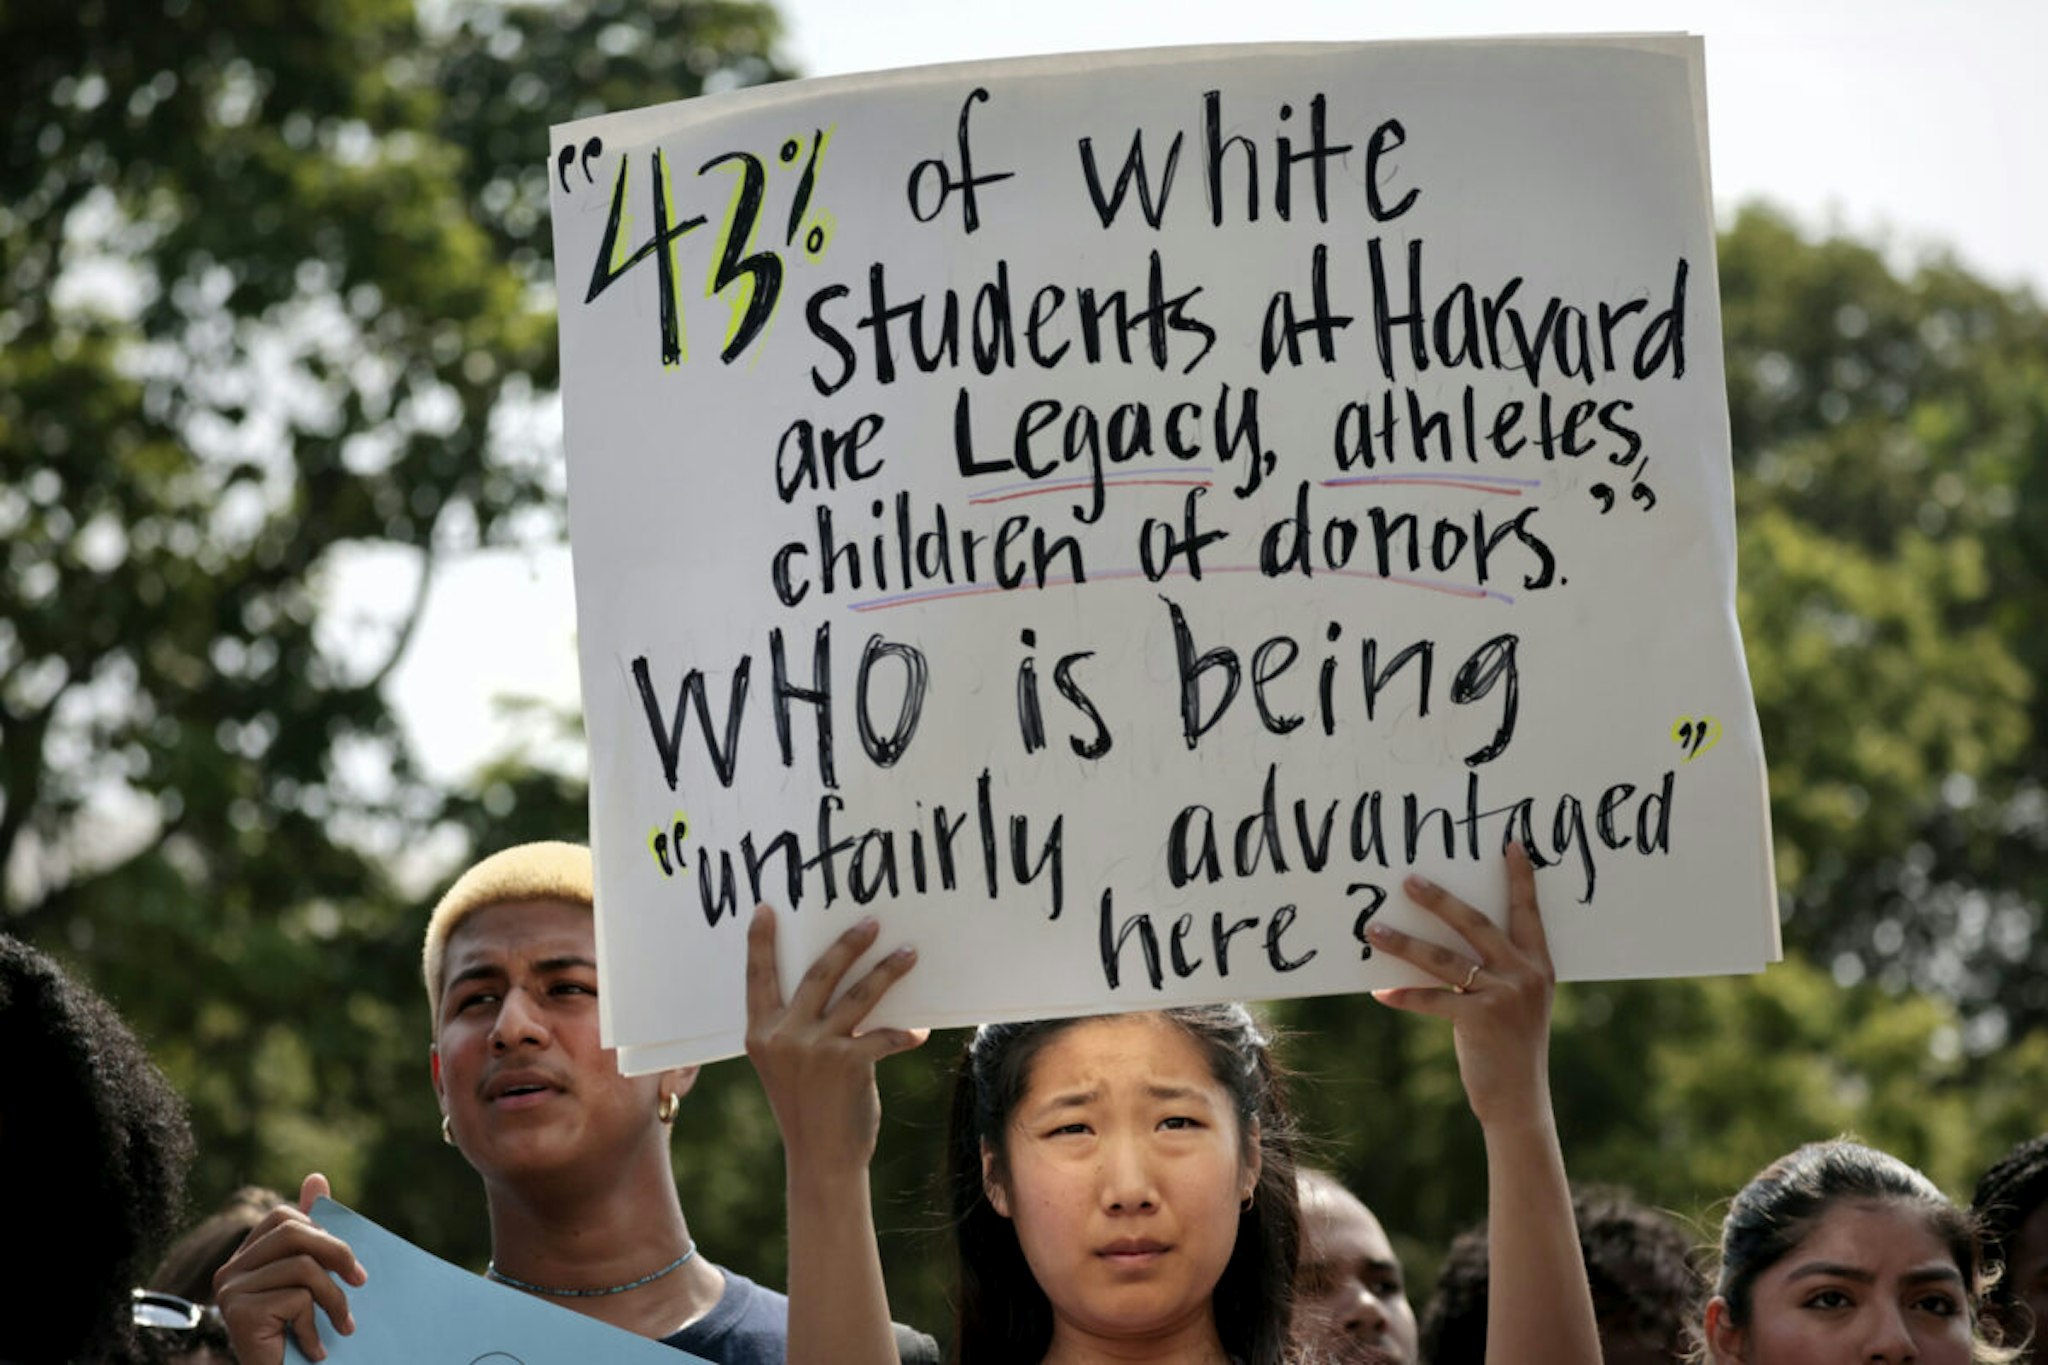 Cambridge, MA - July 1: A Harvard student holds a sign during a rally protesting the Supreme Courts ruling against affirmative action.